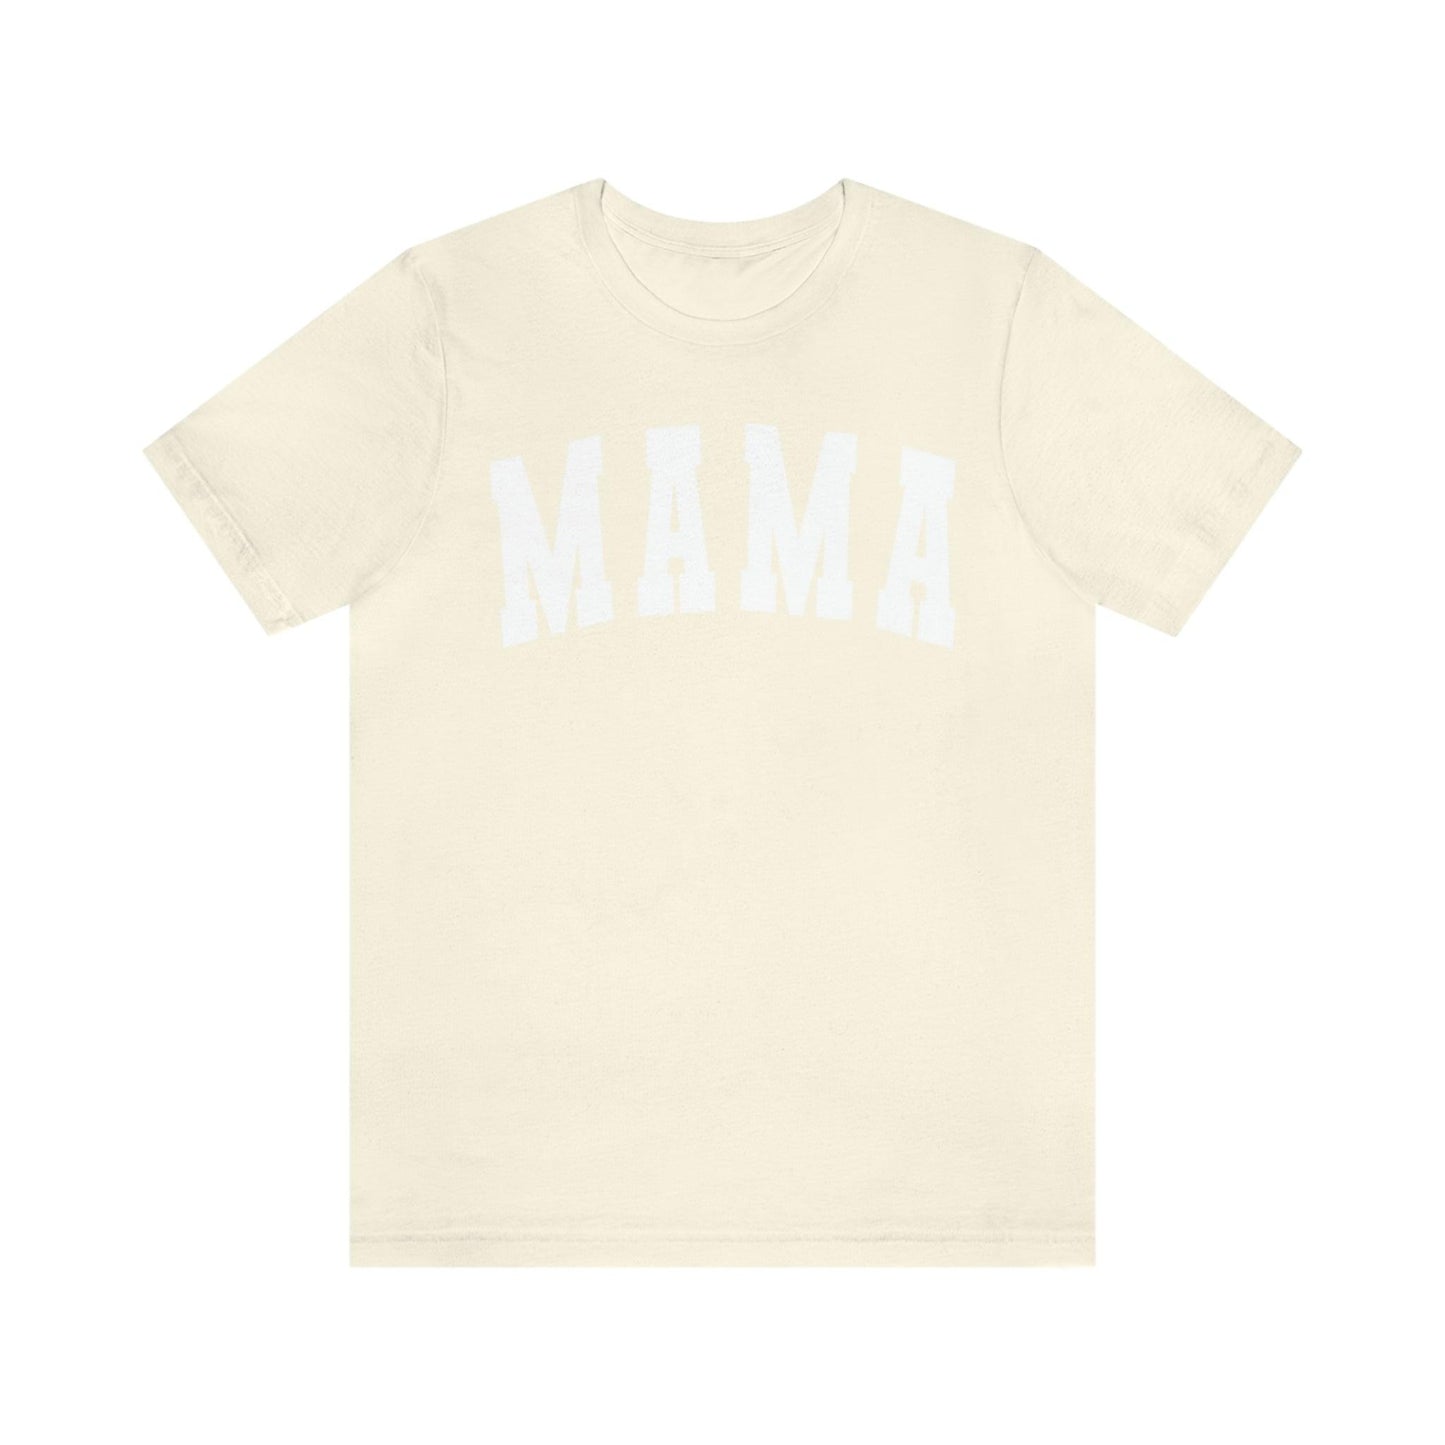 Cute Mama shirt mom shirt gift for her - mothers day shirt mothers day gift mom life shirt - Giftsmojo